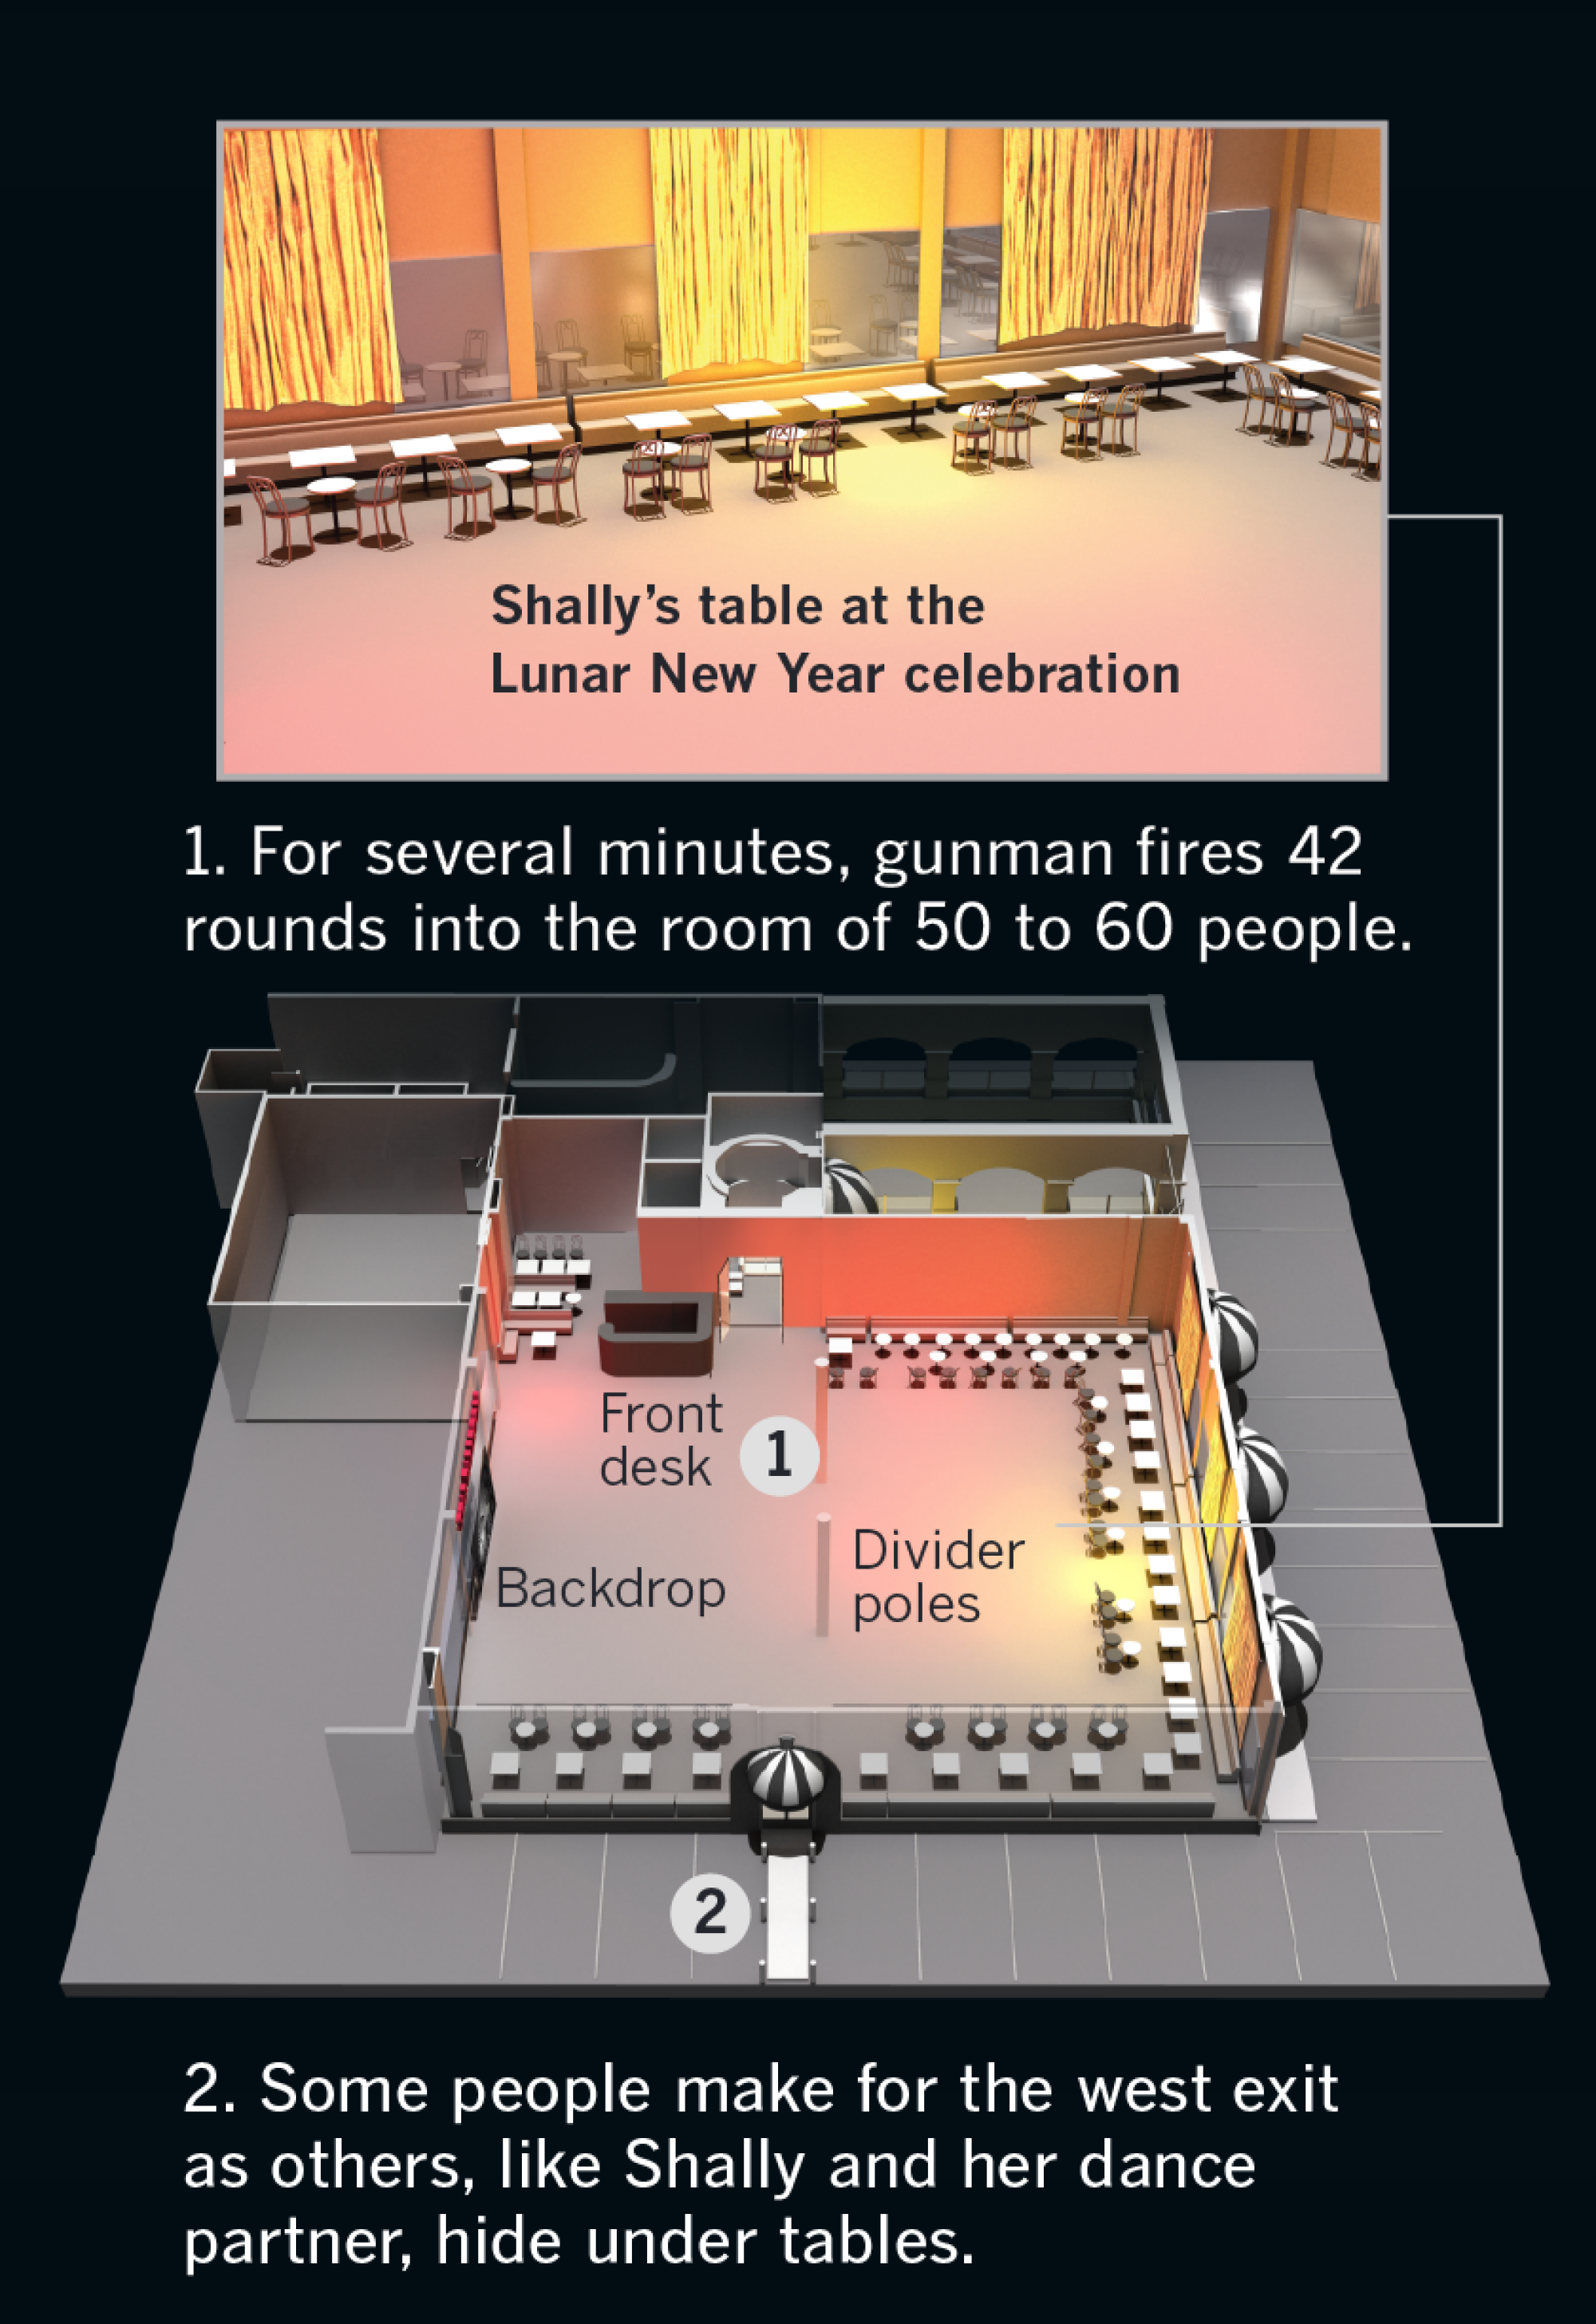 A diagram showing the layout of Star Ballroom and where the gunman entered the room.